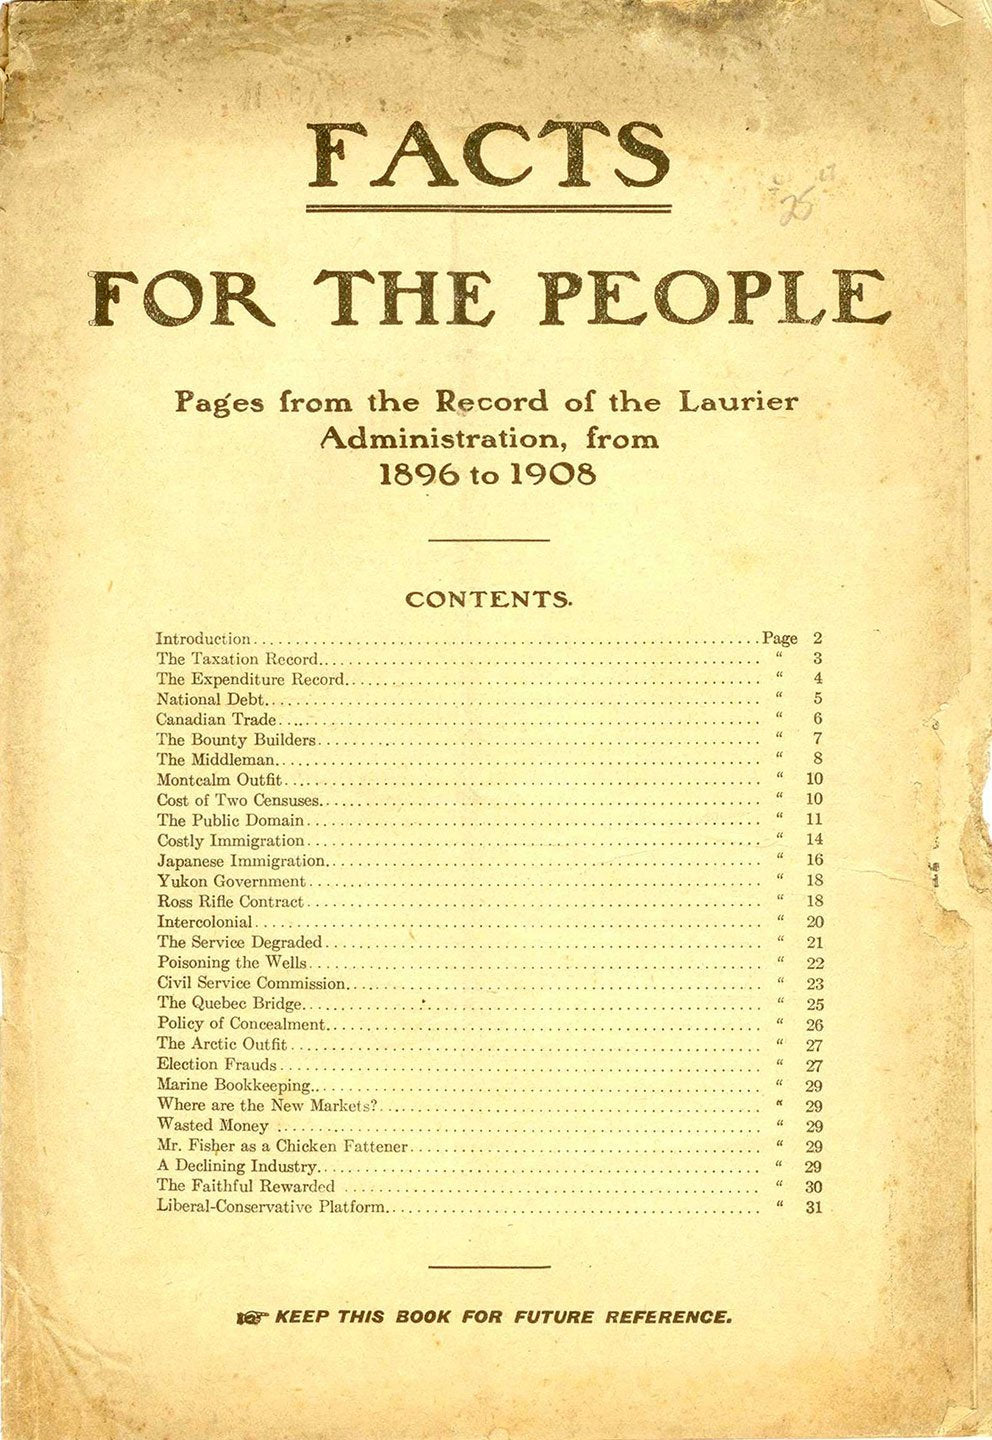 Facts For The People: Pages from the Record of the Laurier Administration, from 1896 to 1908